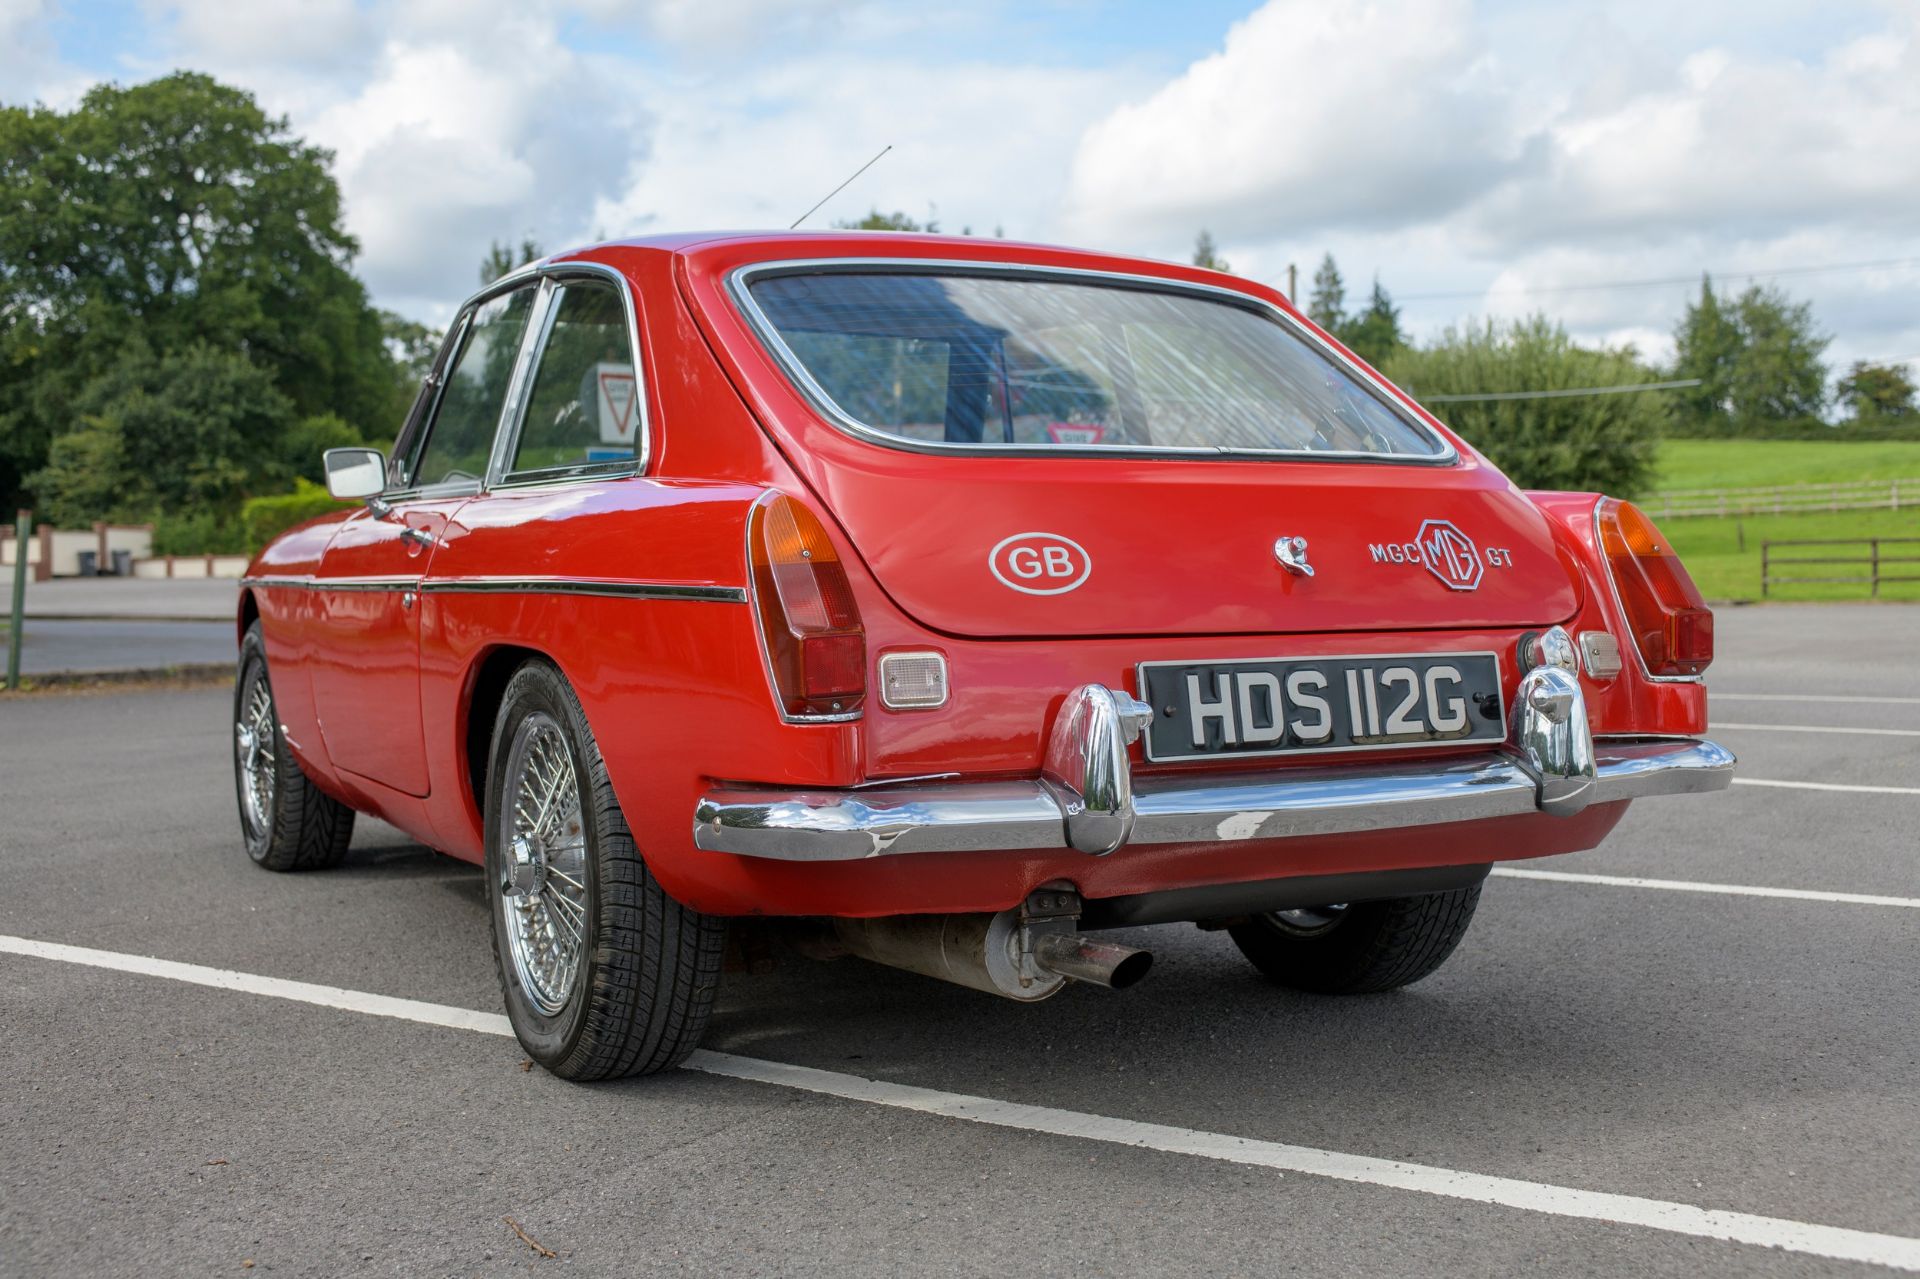 1968 MGC GT Registration Number: HDS 112G Chassis Number: GCD162359 Intended to replace the Austin- - Image 8 of 28